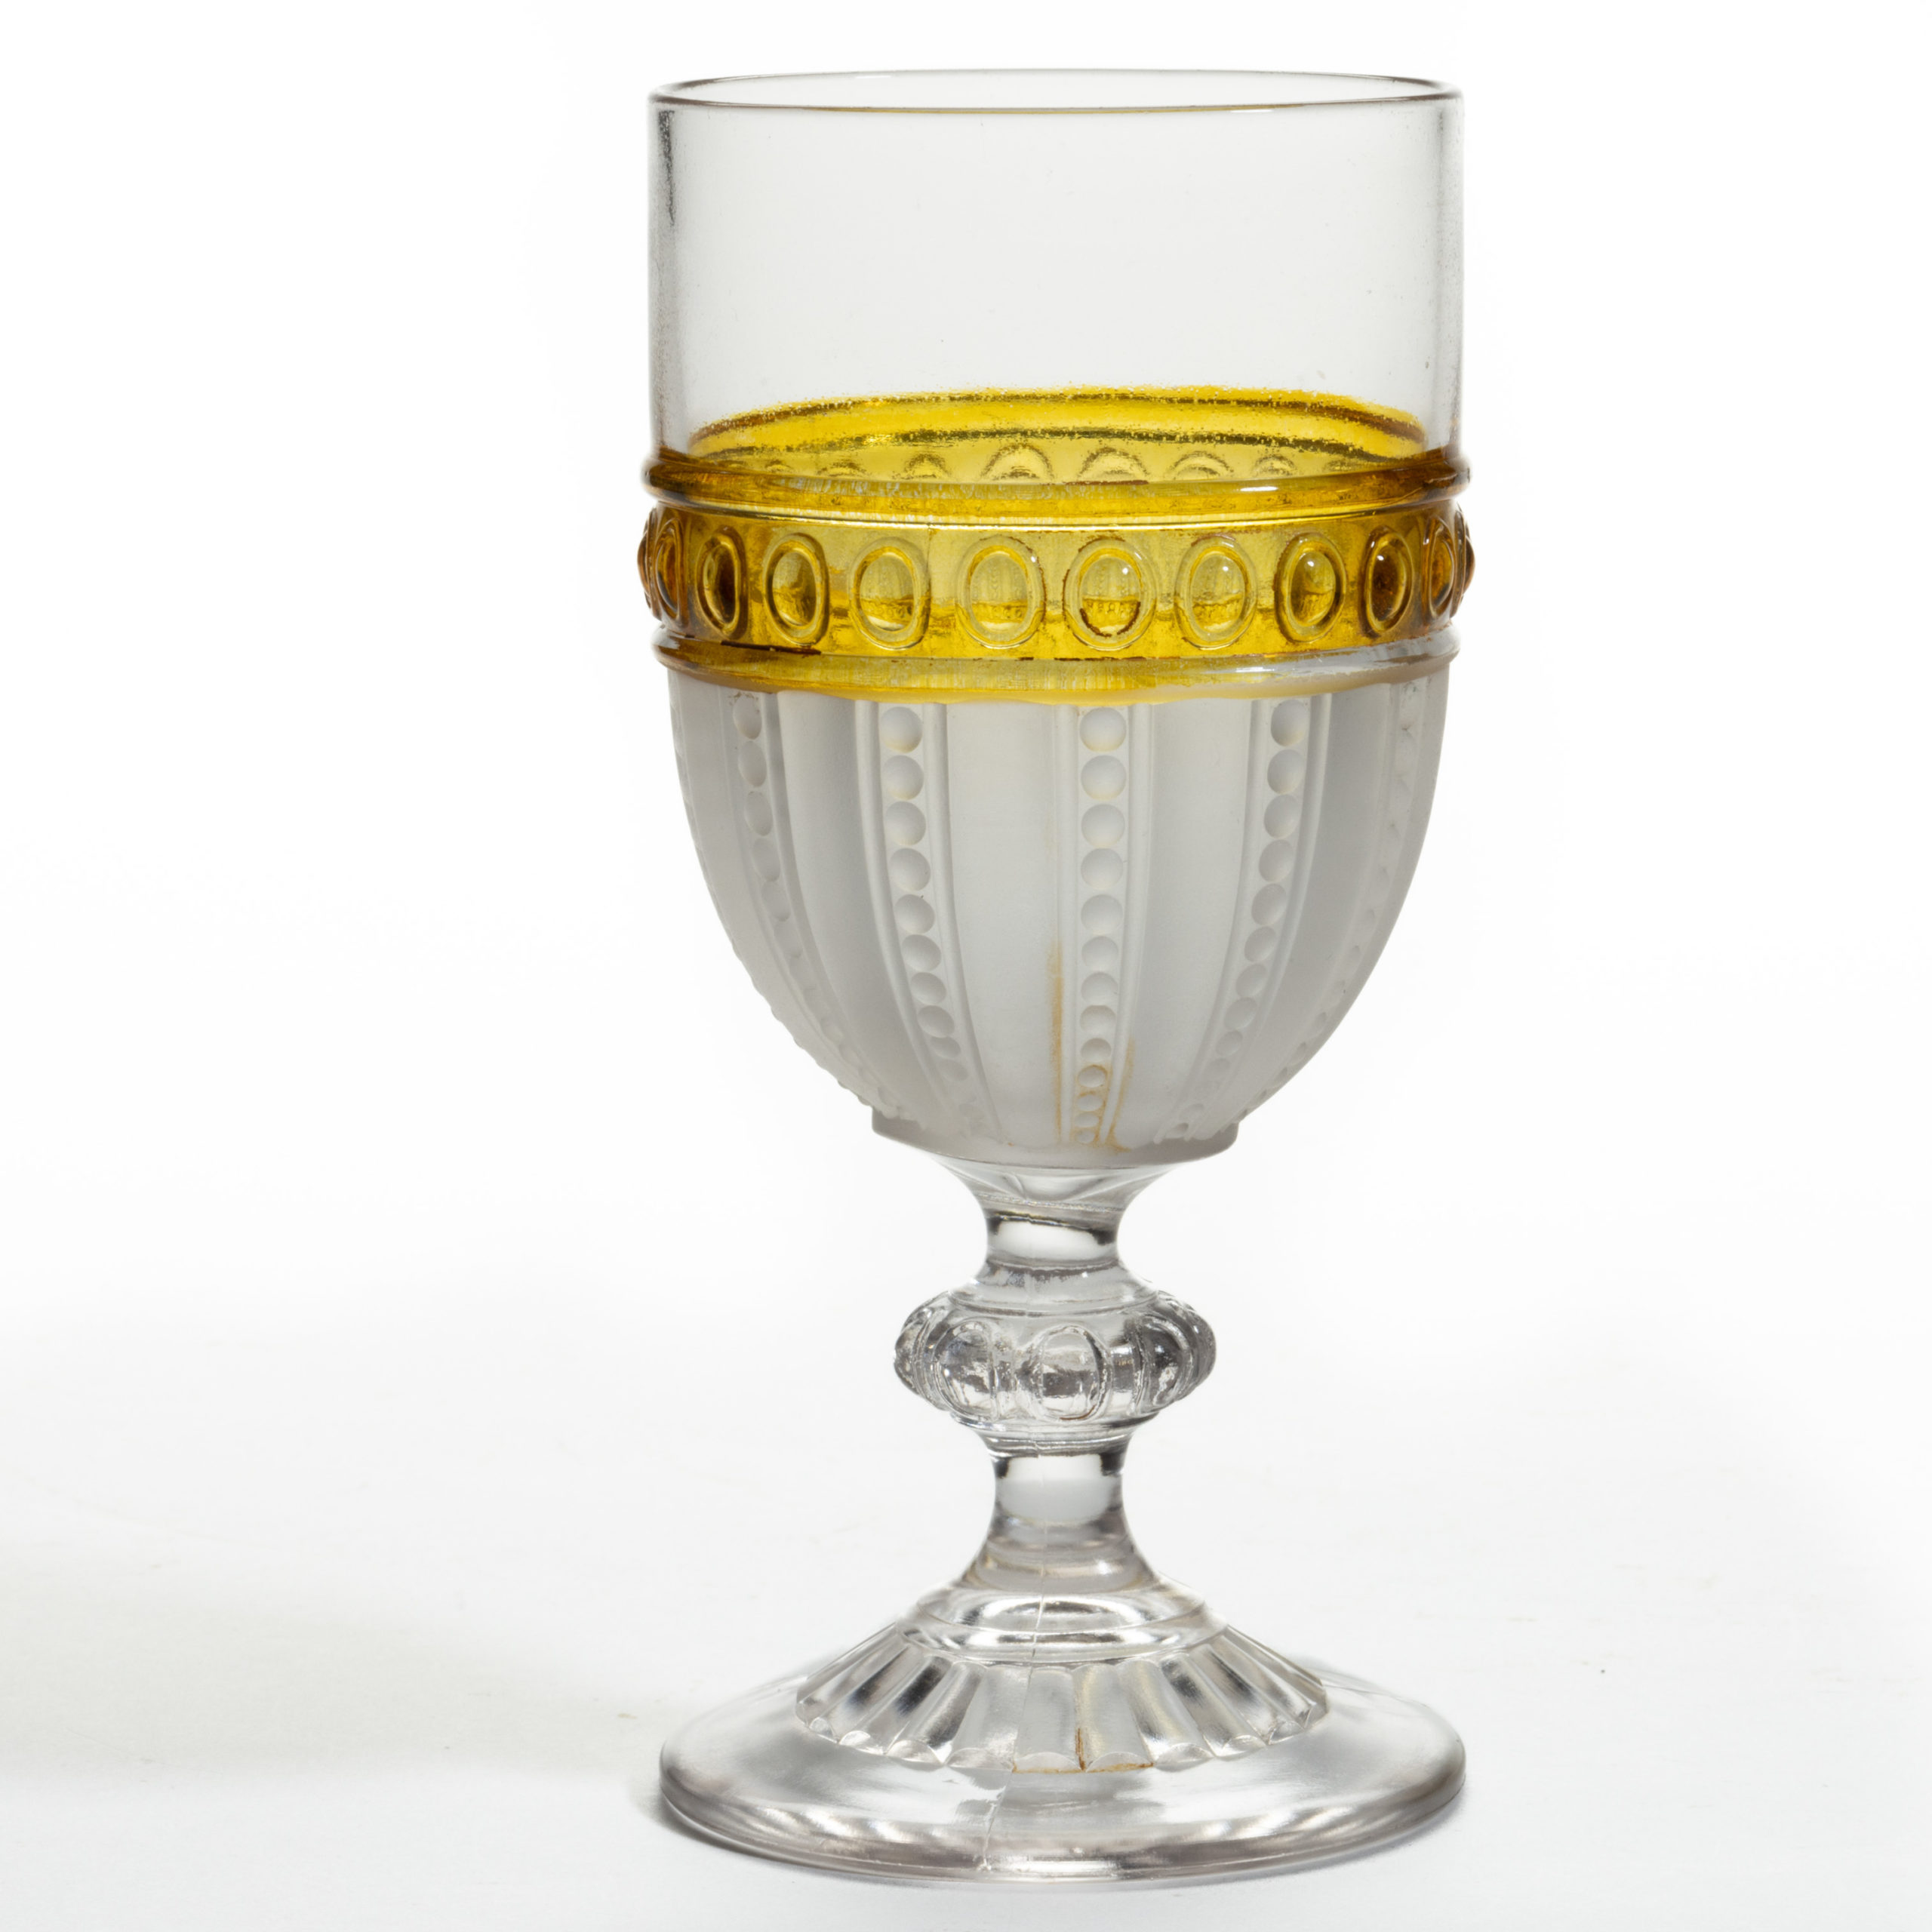 DUNCAN NO. 95 / GONTERMAN – AMBER-STAINED GOBLET,